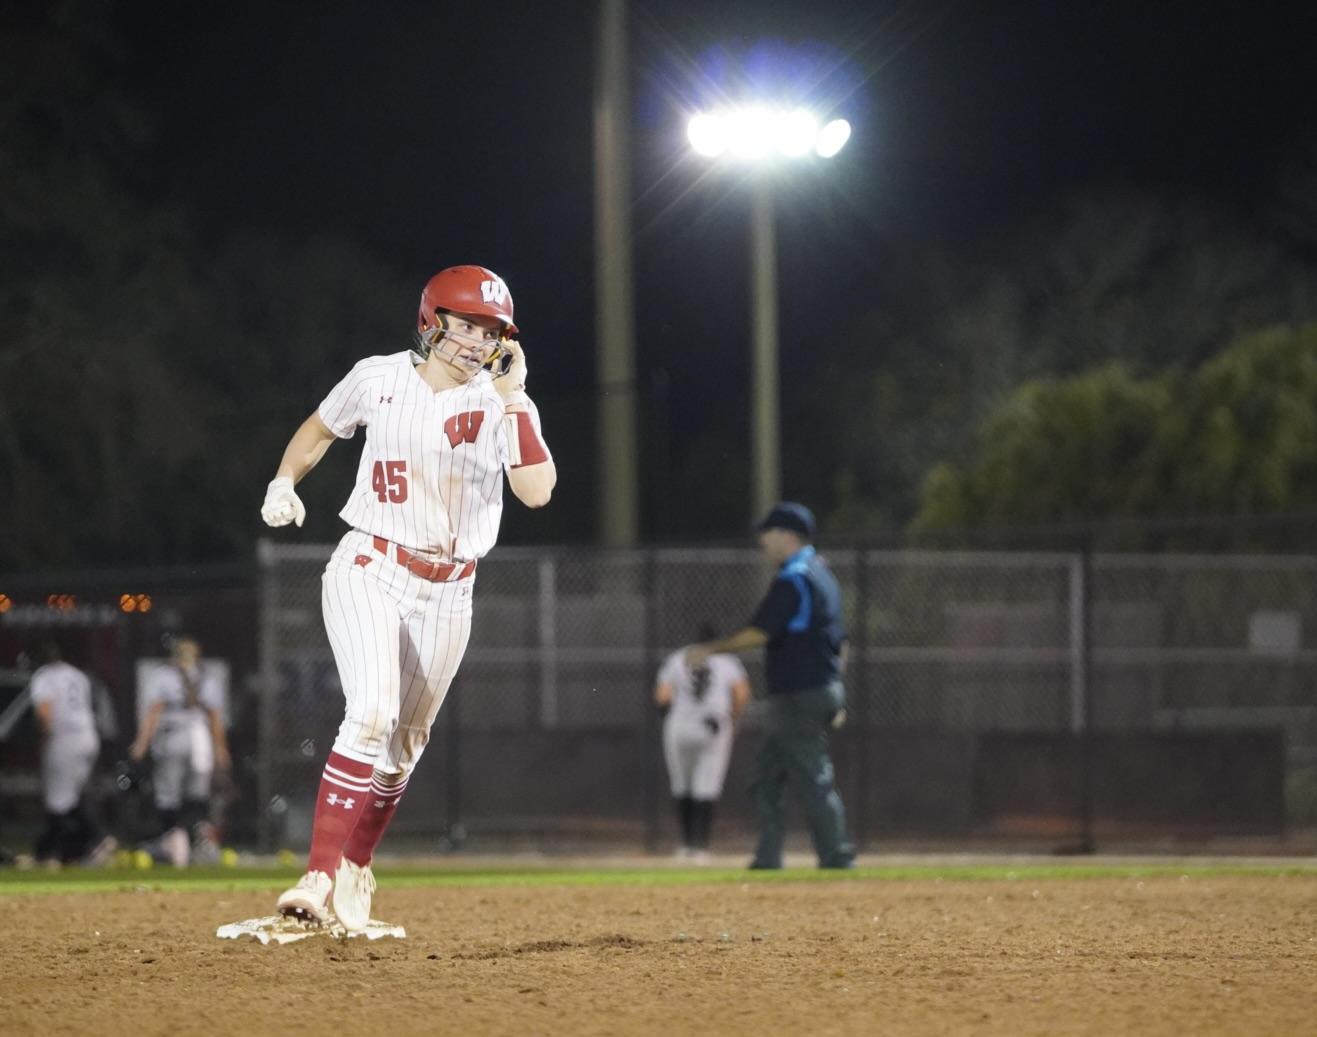 Softball: Wisconsin squanders three opportunities to earn win in Clearwater, finish 0-5